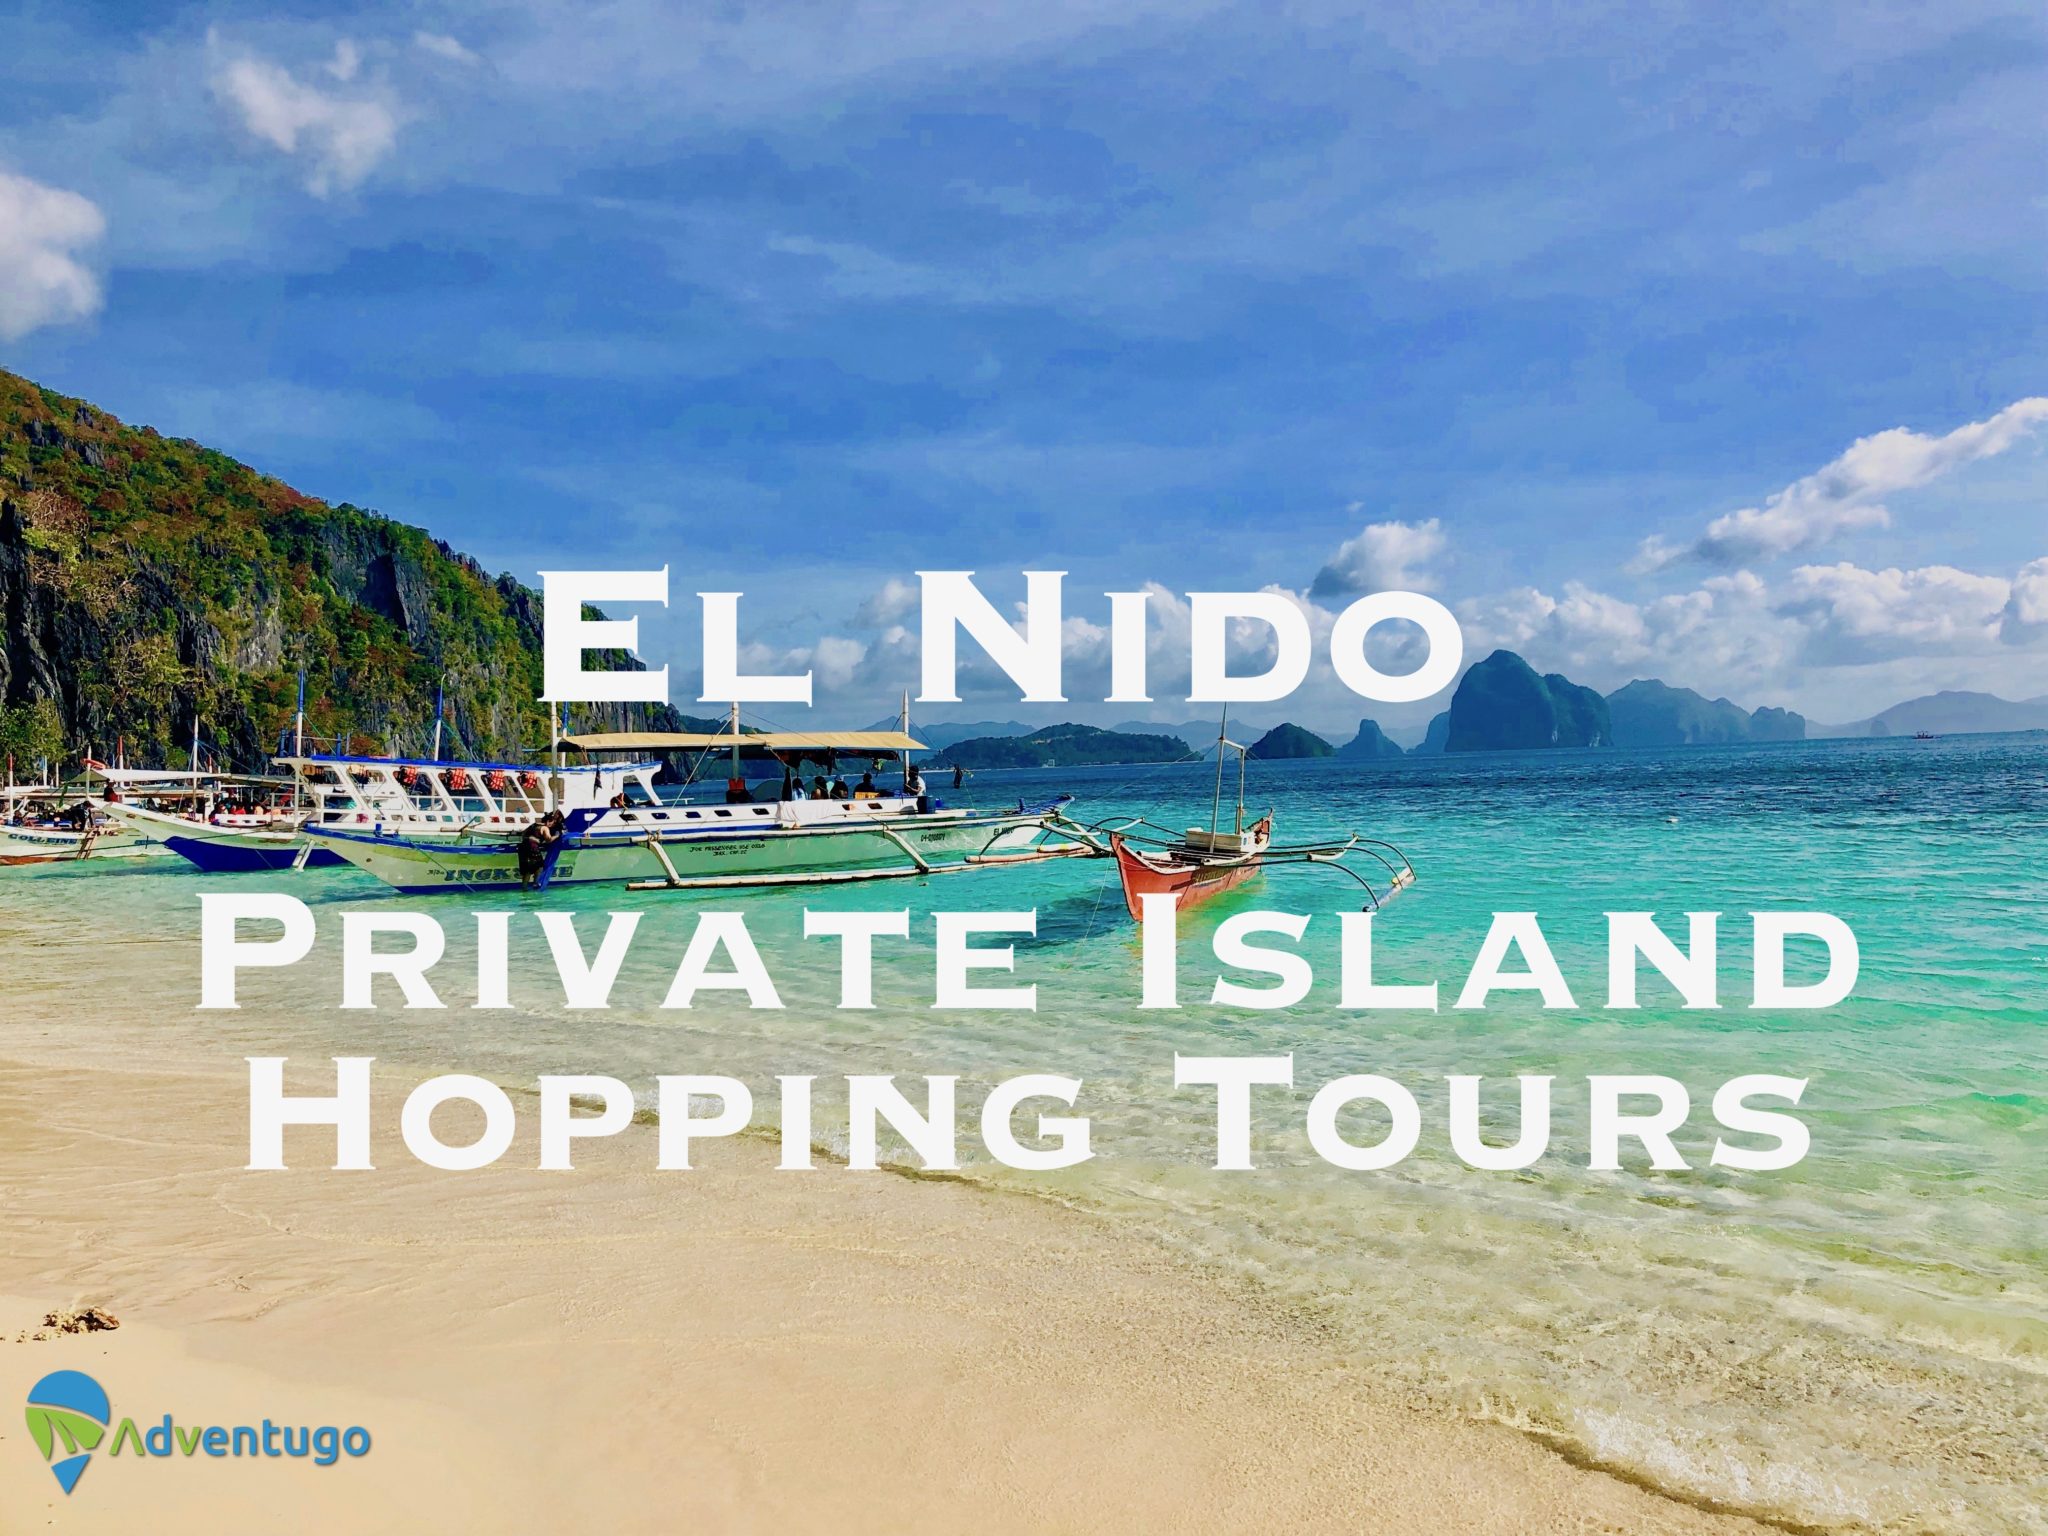 El Nido Private Island Hopping tours, Philippines Travel Blog